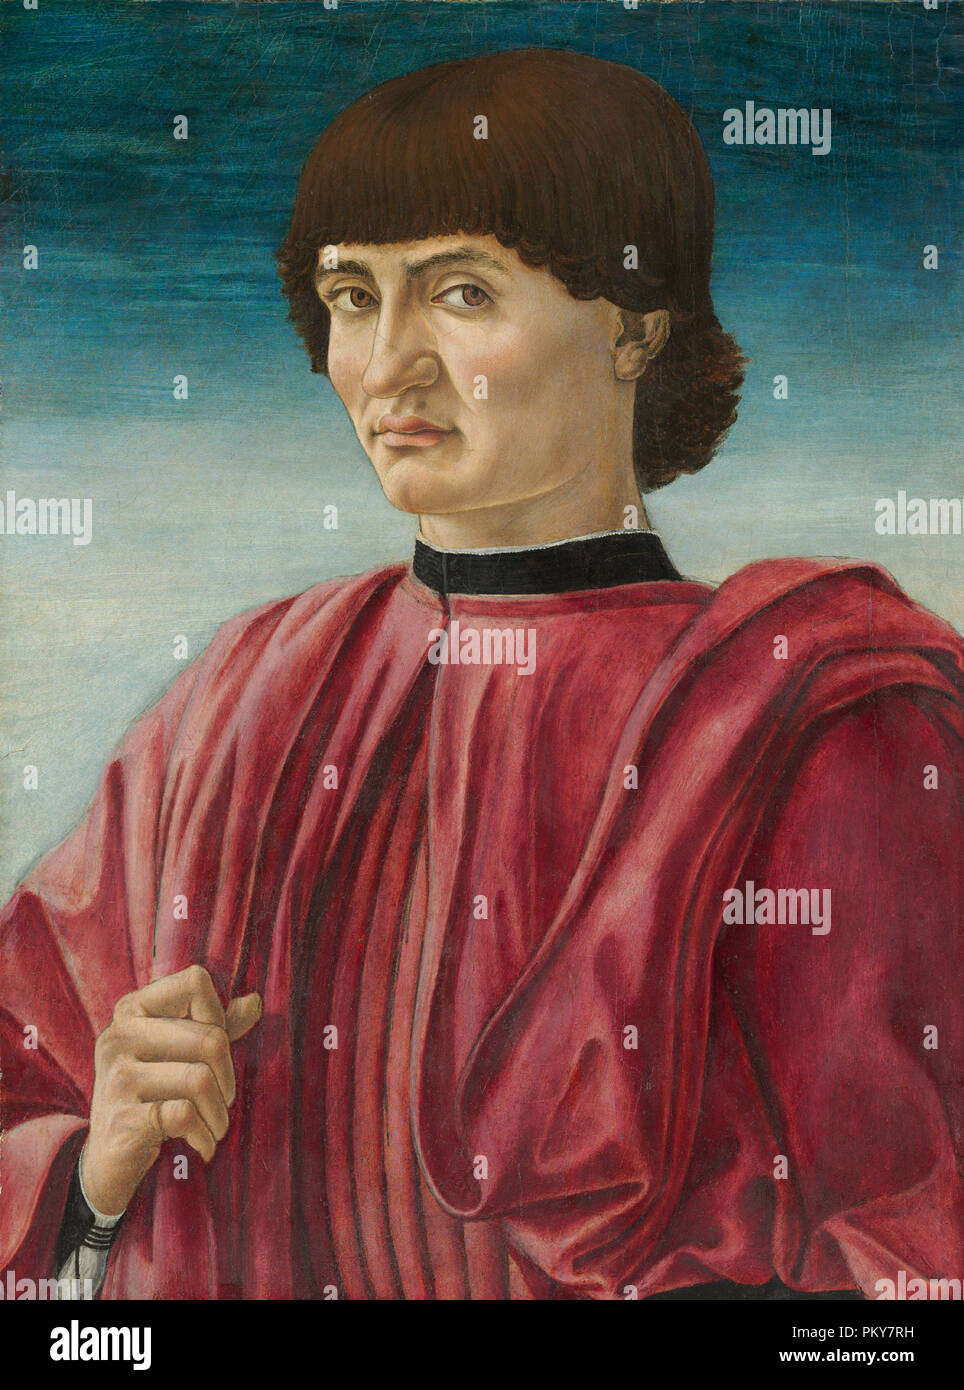 Portrait of a Man. Dated: c. 1450. Dimensions: painted surface: 54.2 x 40.4 cm (21 5/16 x 15 7/8 in.)  support: 55.5 x 41.2 cm (21 7/8 x 16 1/4 in.)  framed: 86.4 x 74.9 x 8.9 cm (34 x 29 1/2 x 3 1/2 in.). Medium: tempera on panel. Museum: National Gallery of Art, Washington DC. Author: ANDREA DEL CASTAGNO. CASTAGNO, ANDREA DEL. Stock Photo